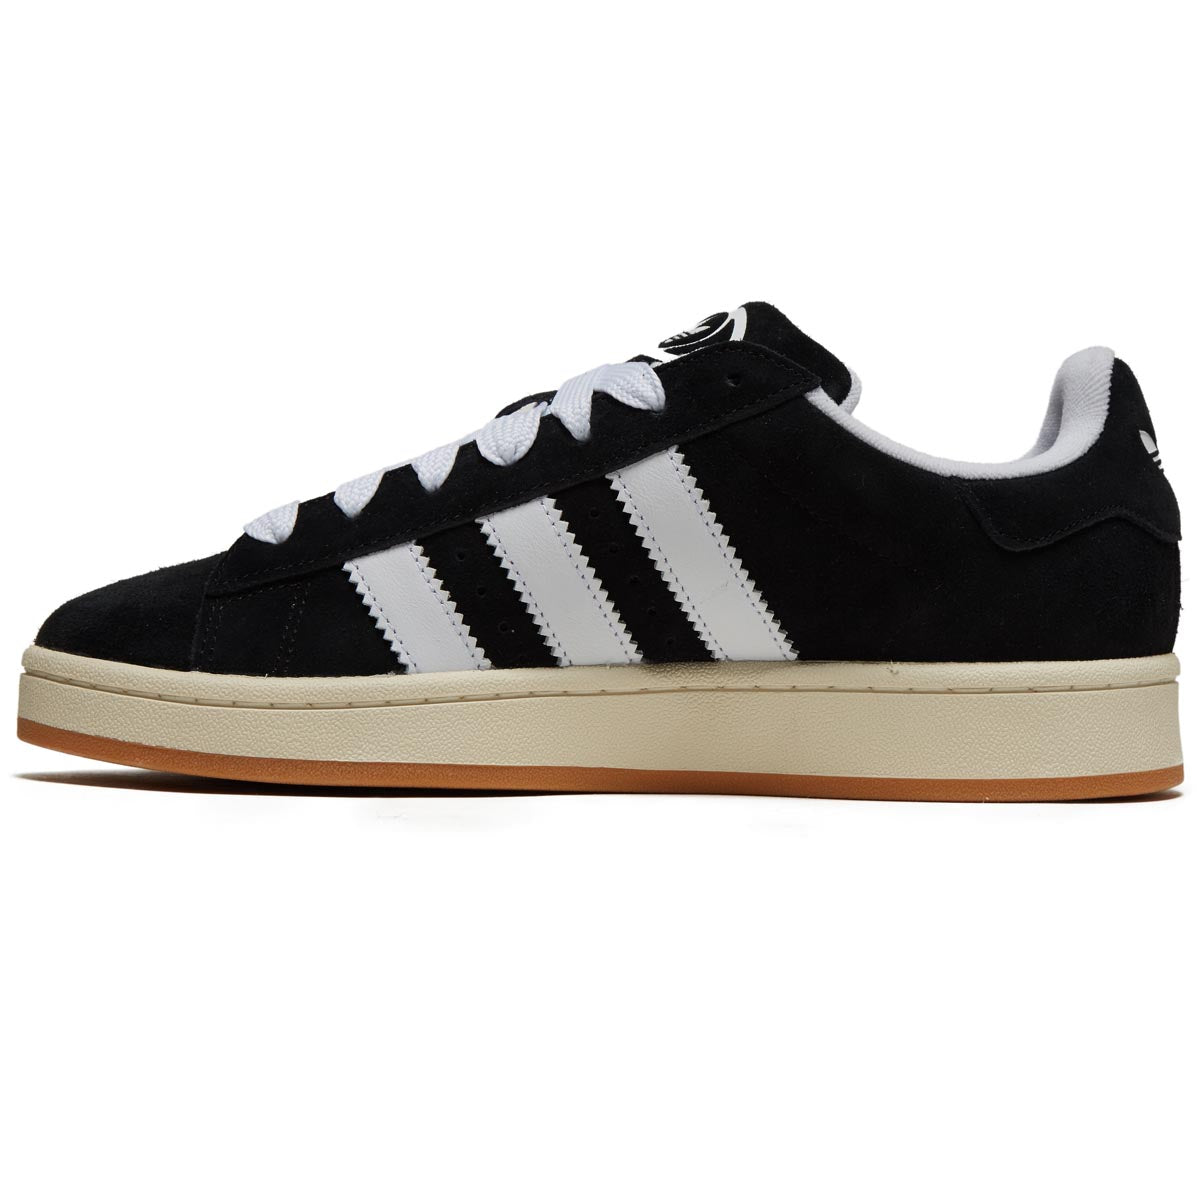 Adidas Campus 00s Shoes - Core Black/Ftwr White/Off White image 2